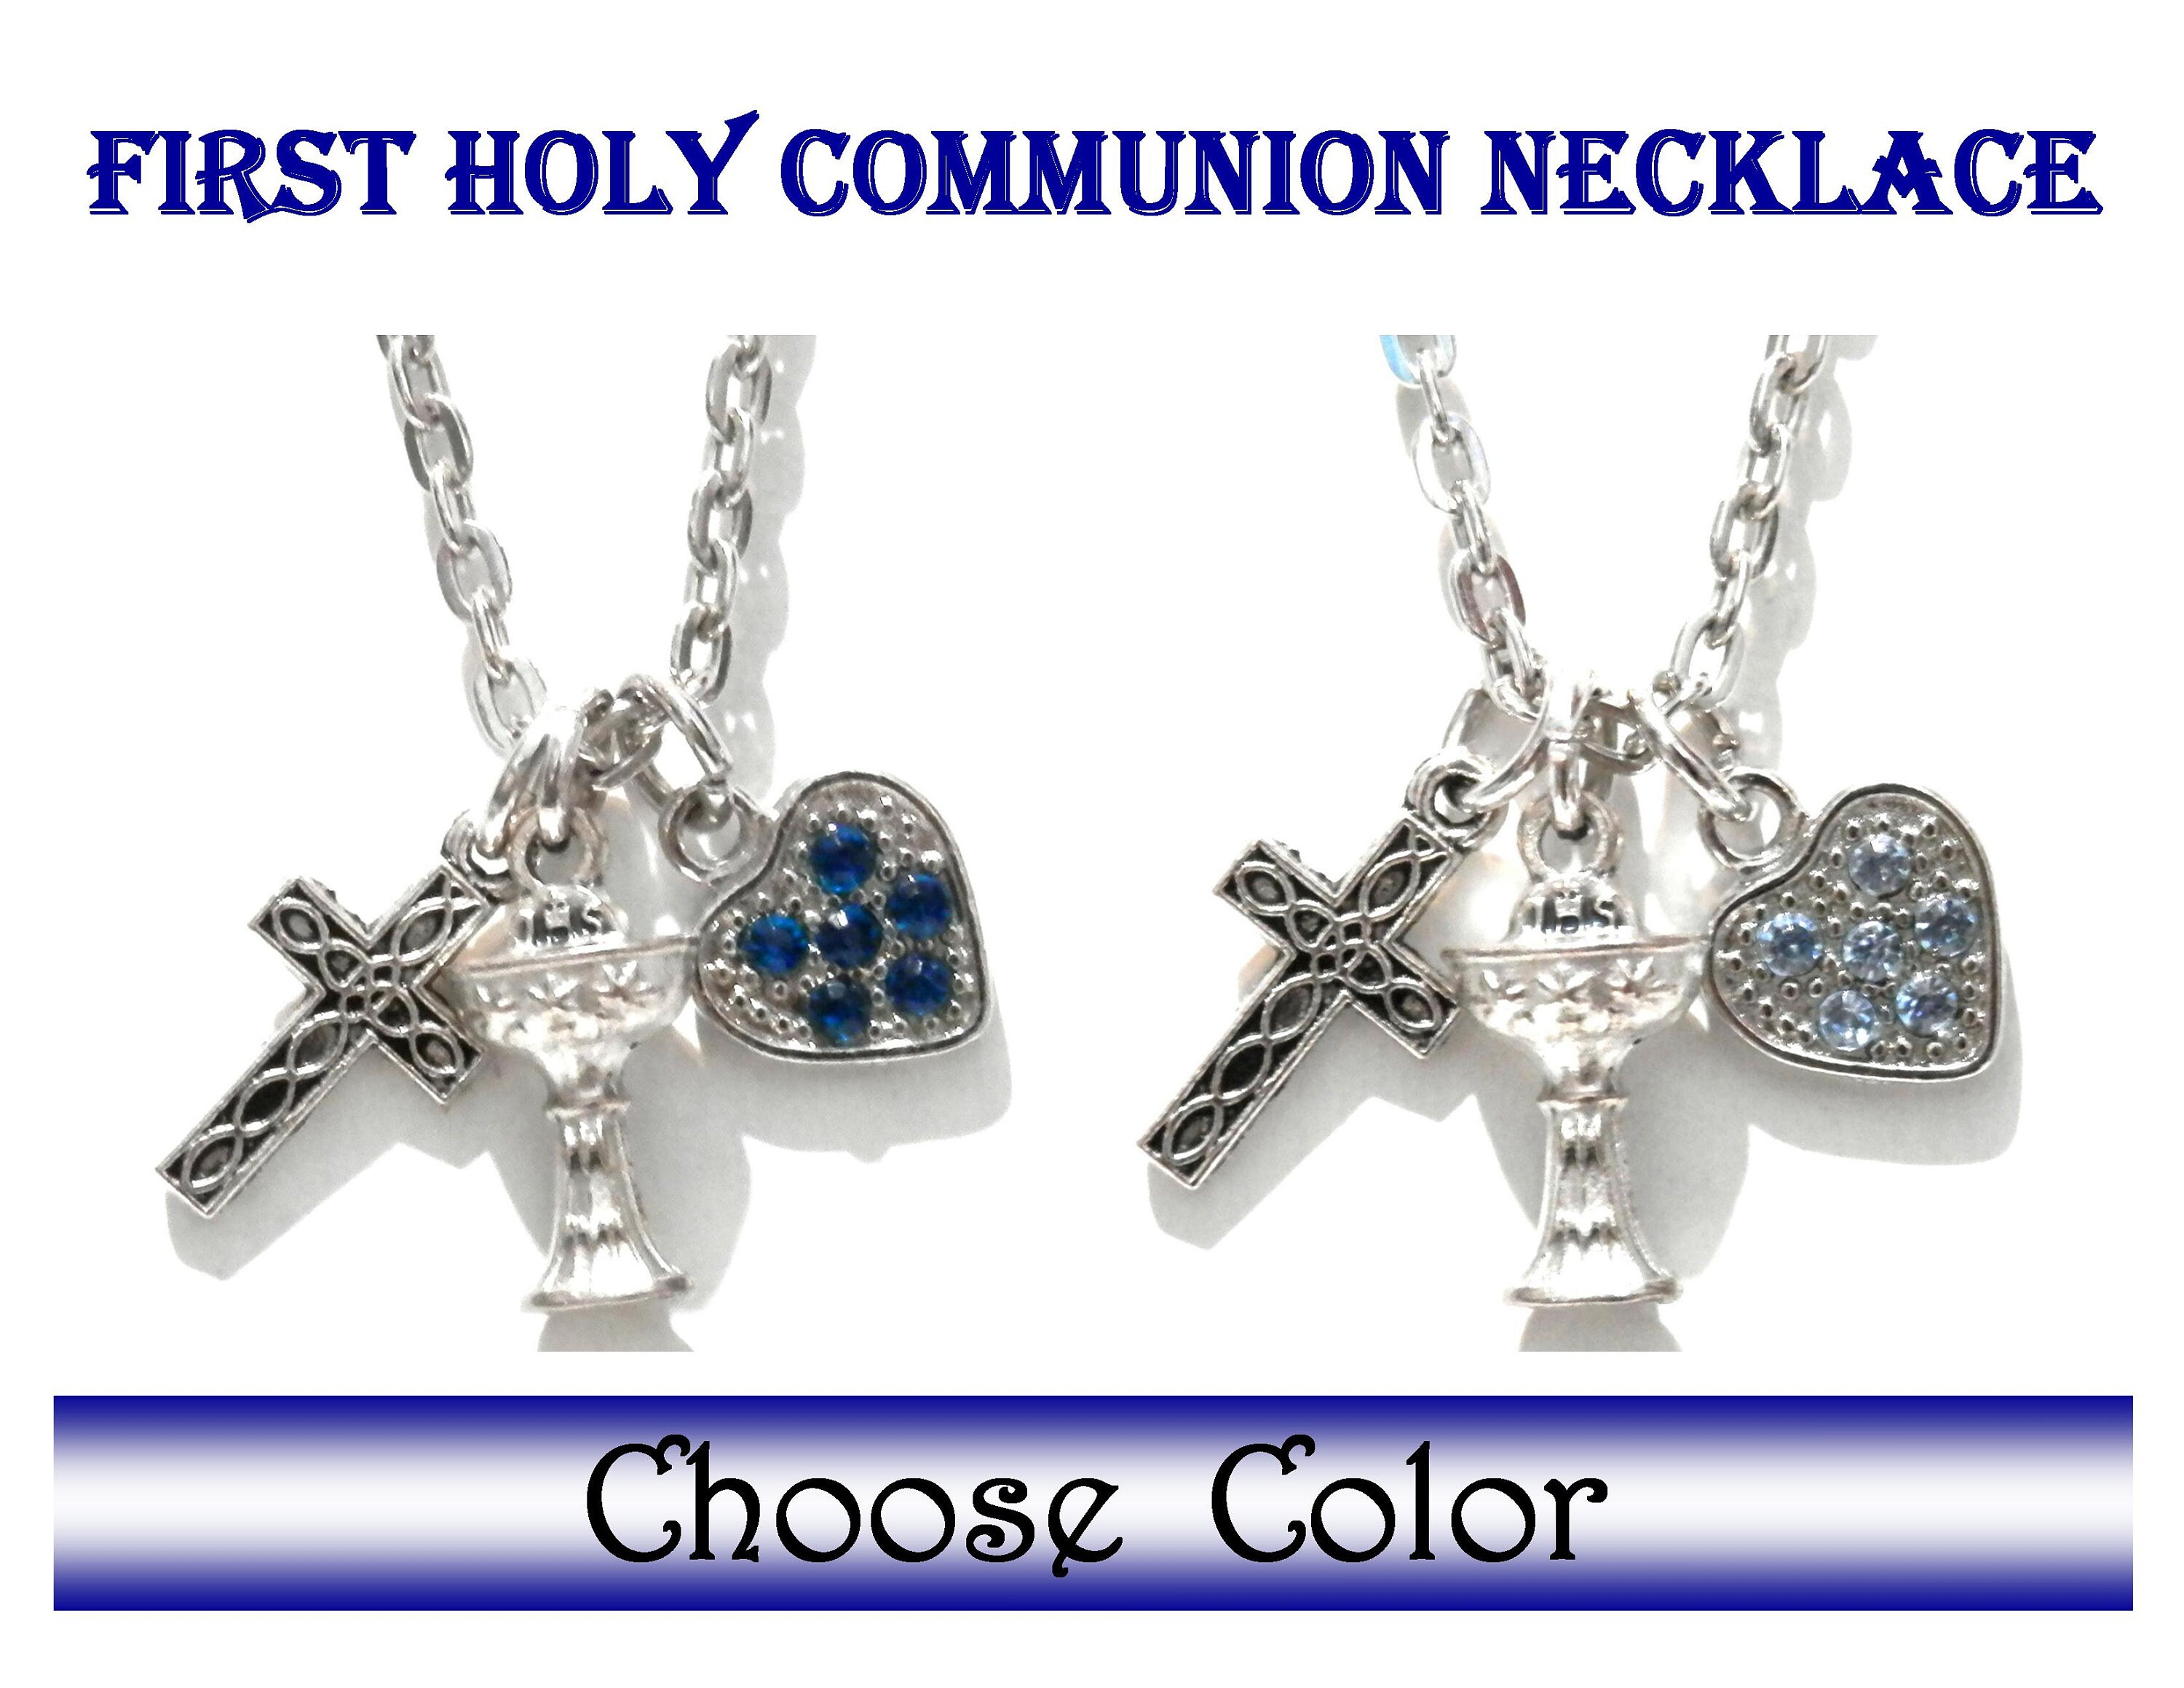 Girls First 1st Holy Communion Necklace Chalice Medal Charm Pendant Chain Gift 